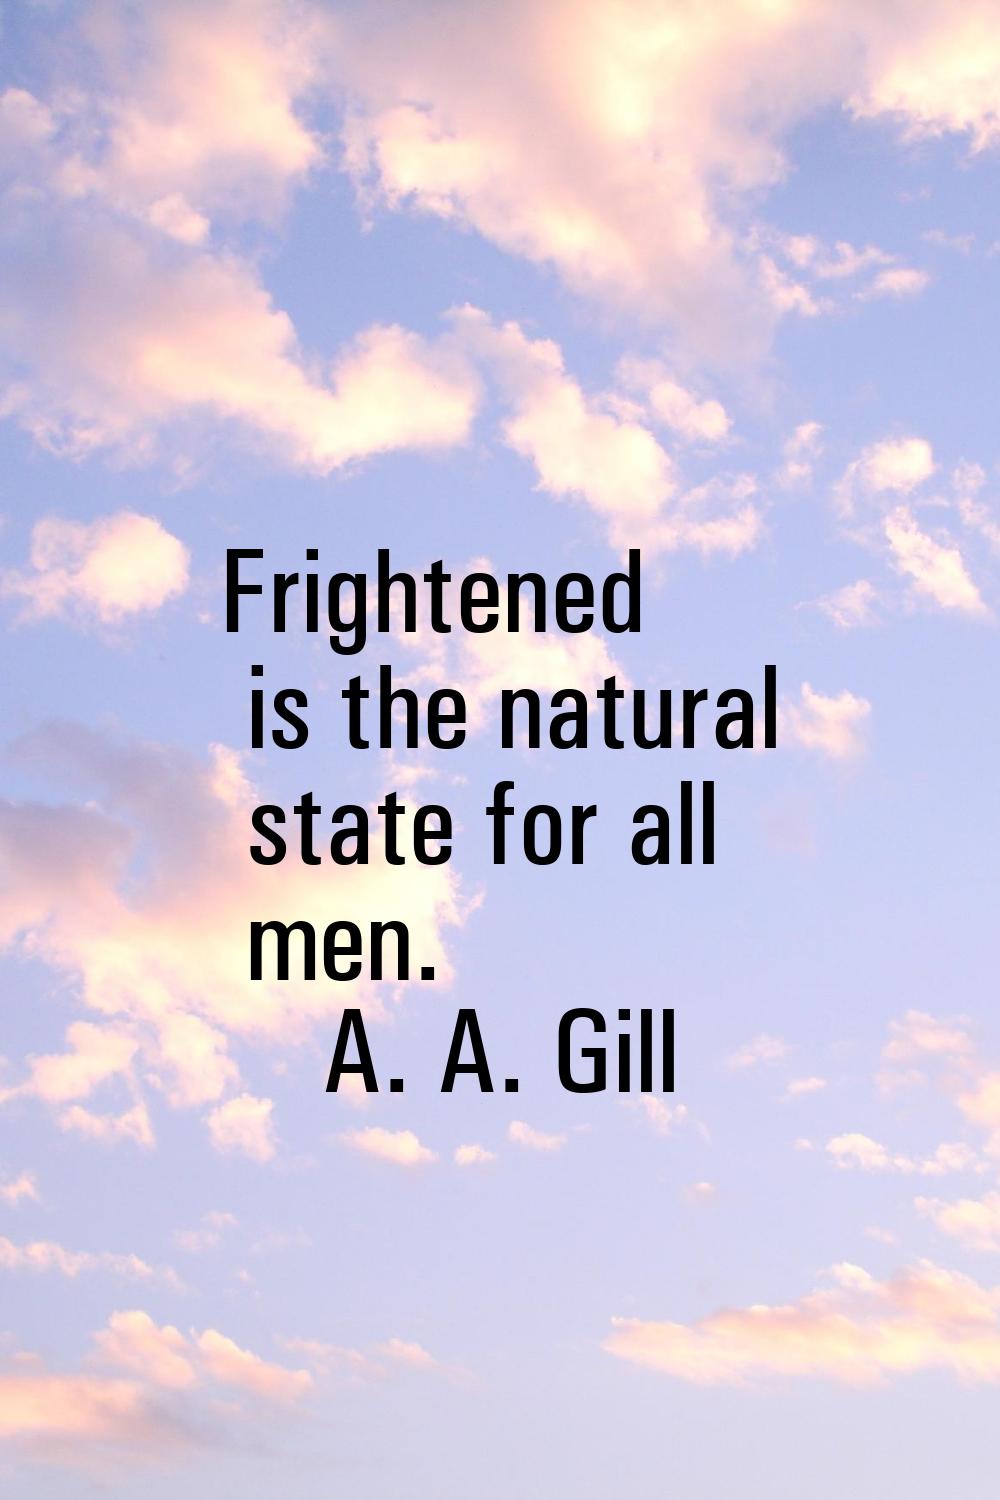 Frightened is the natural state for all men.